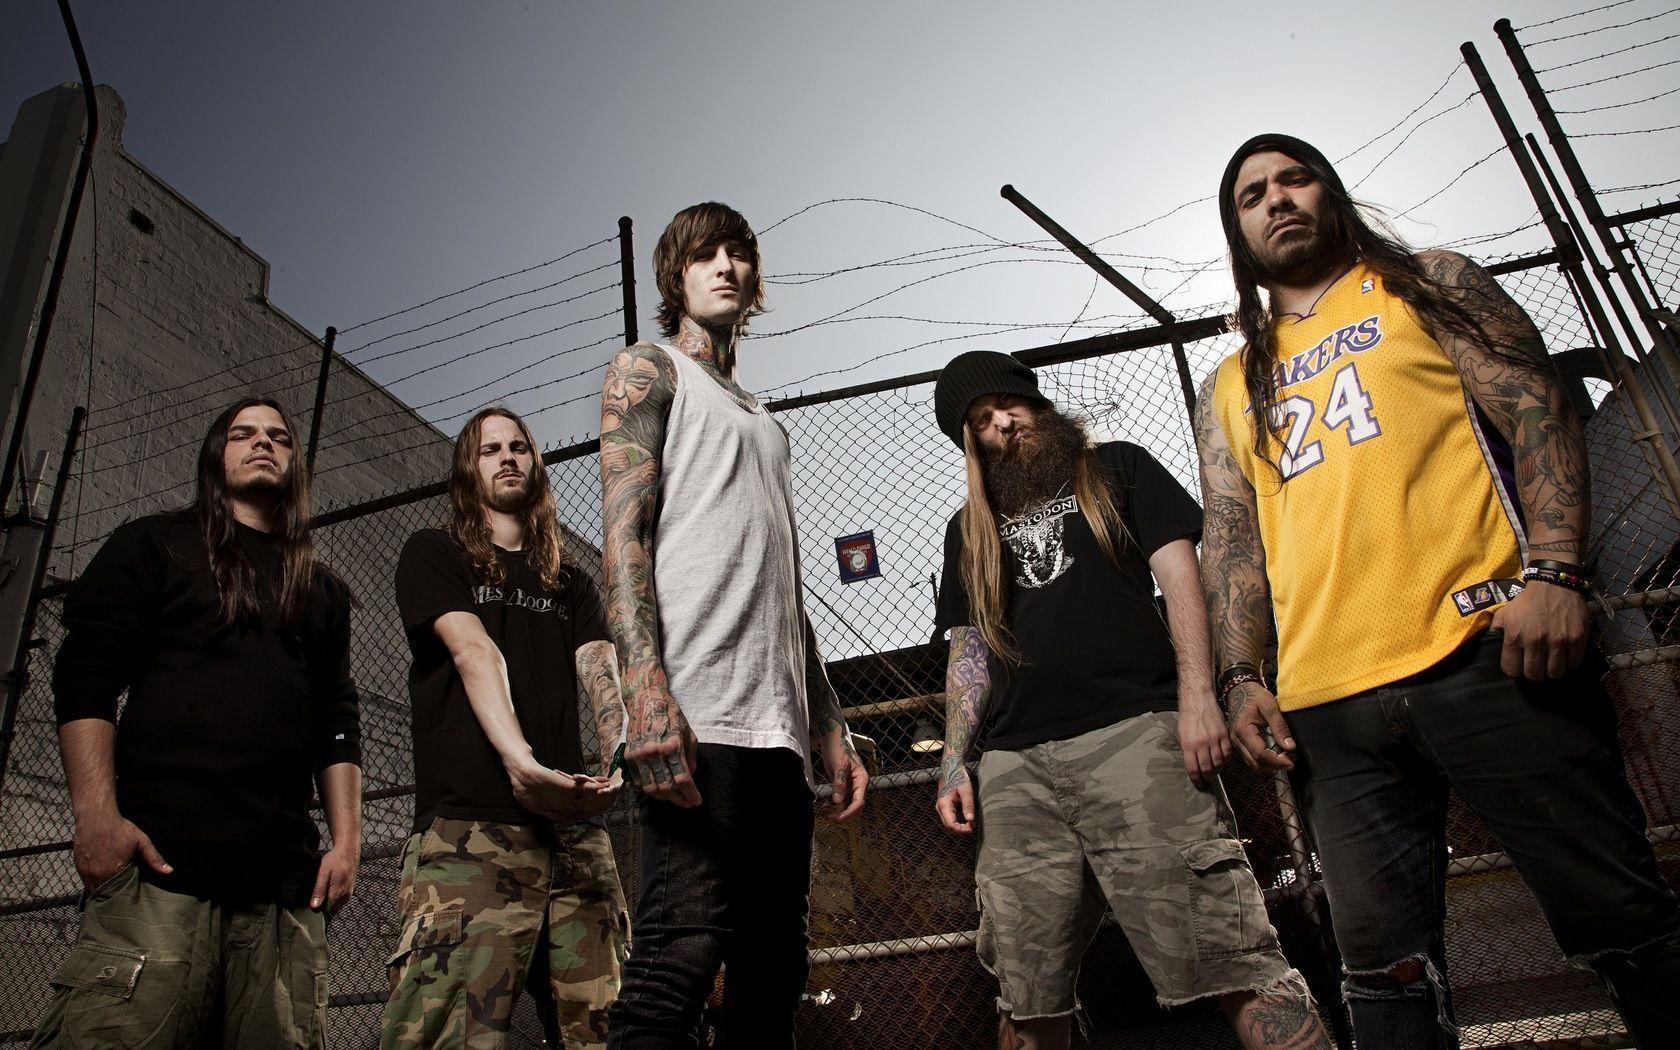 Suicide Silence Wallpaper. Suicide Silence Background